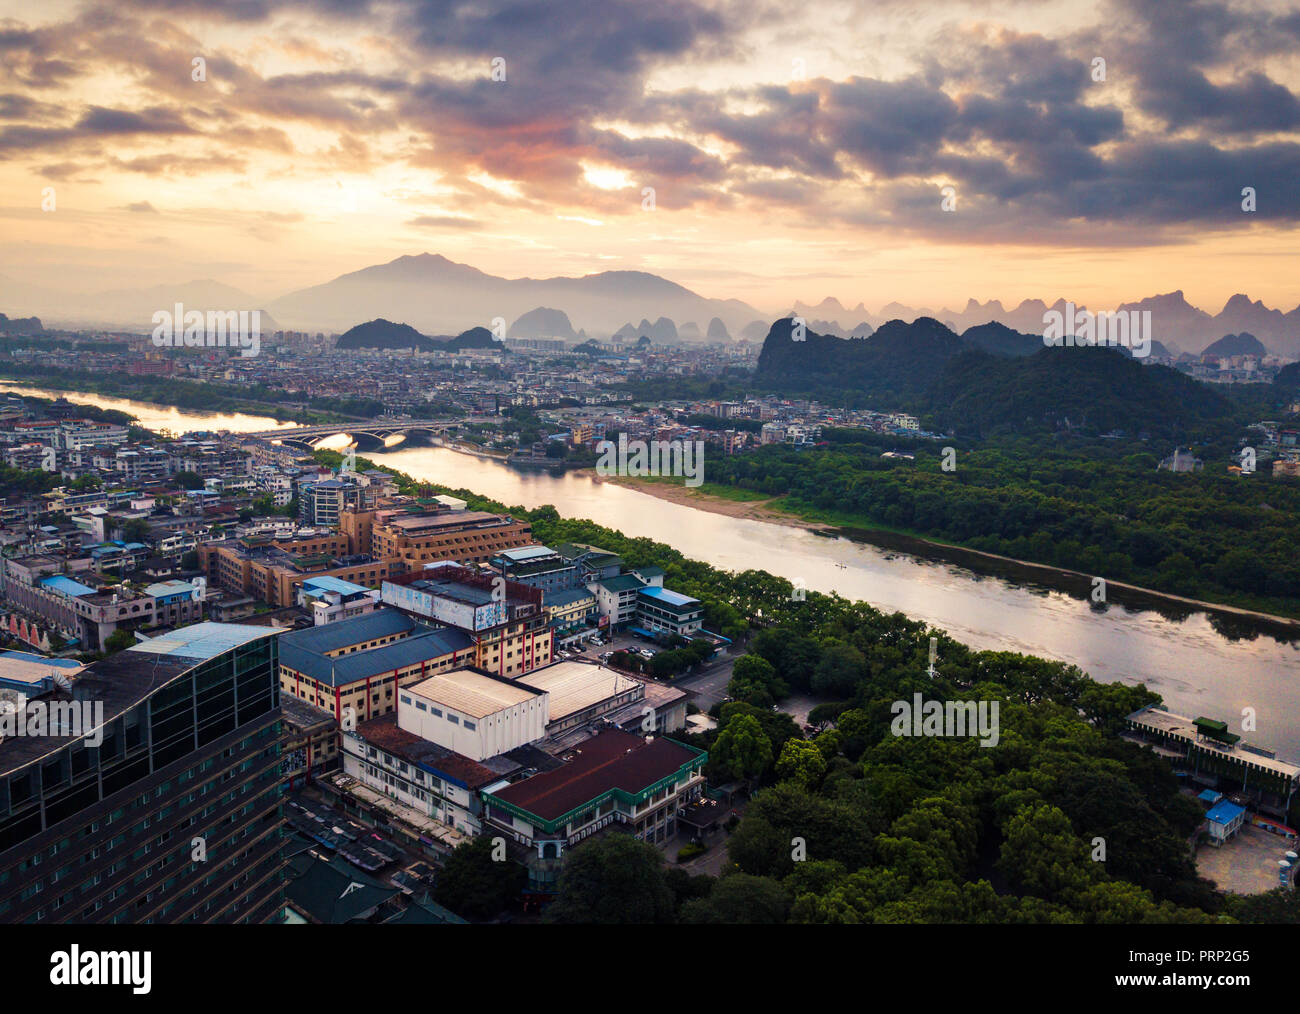 Beautiful sunrise over Li river in Guilin, China aerial view Stock Photo